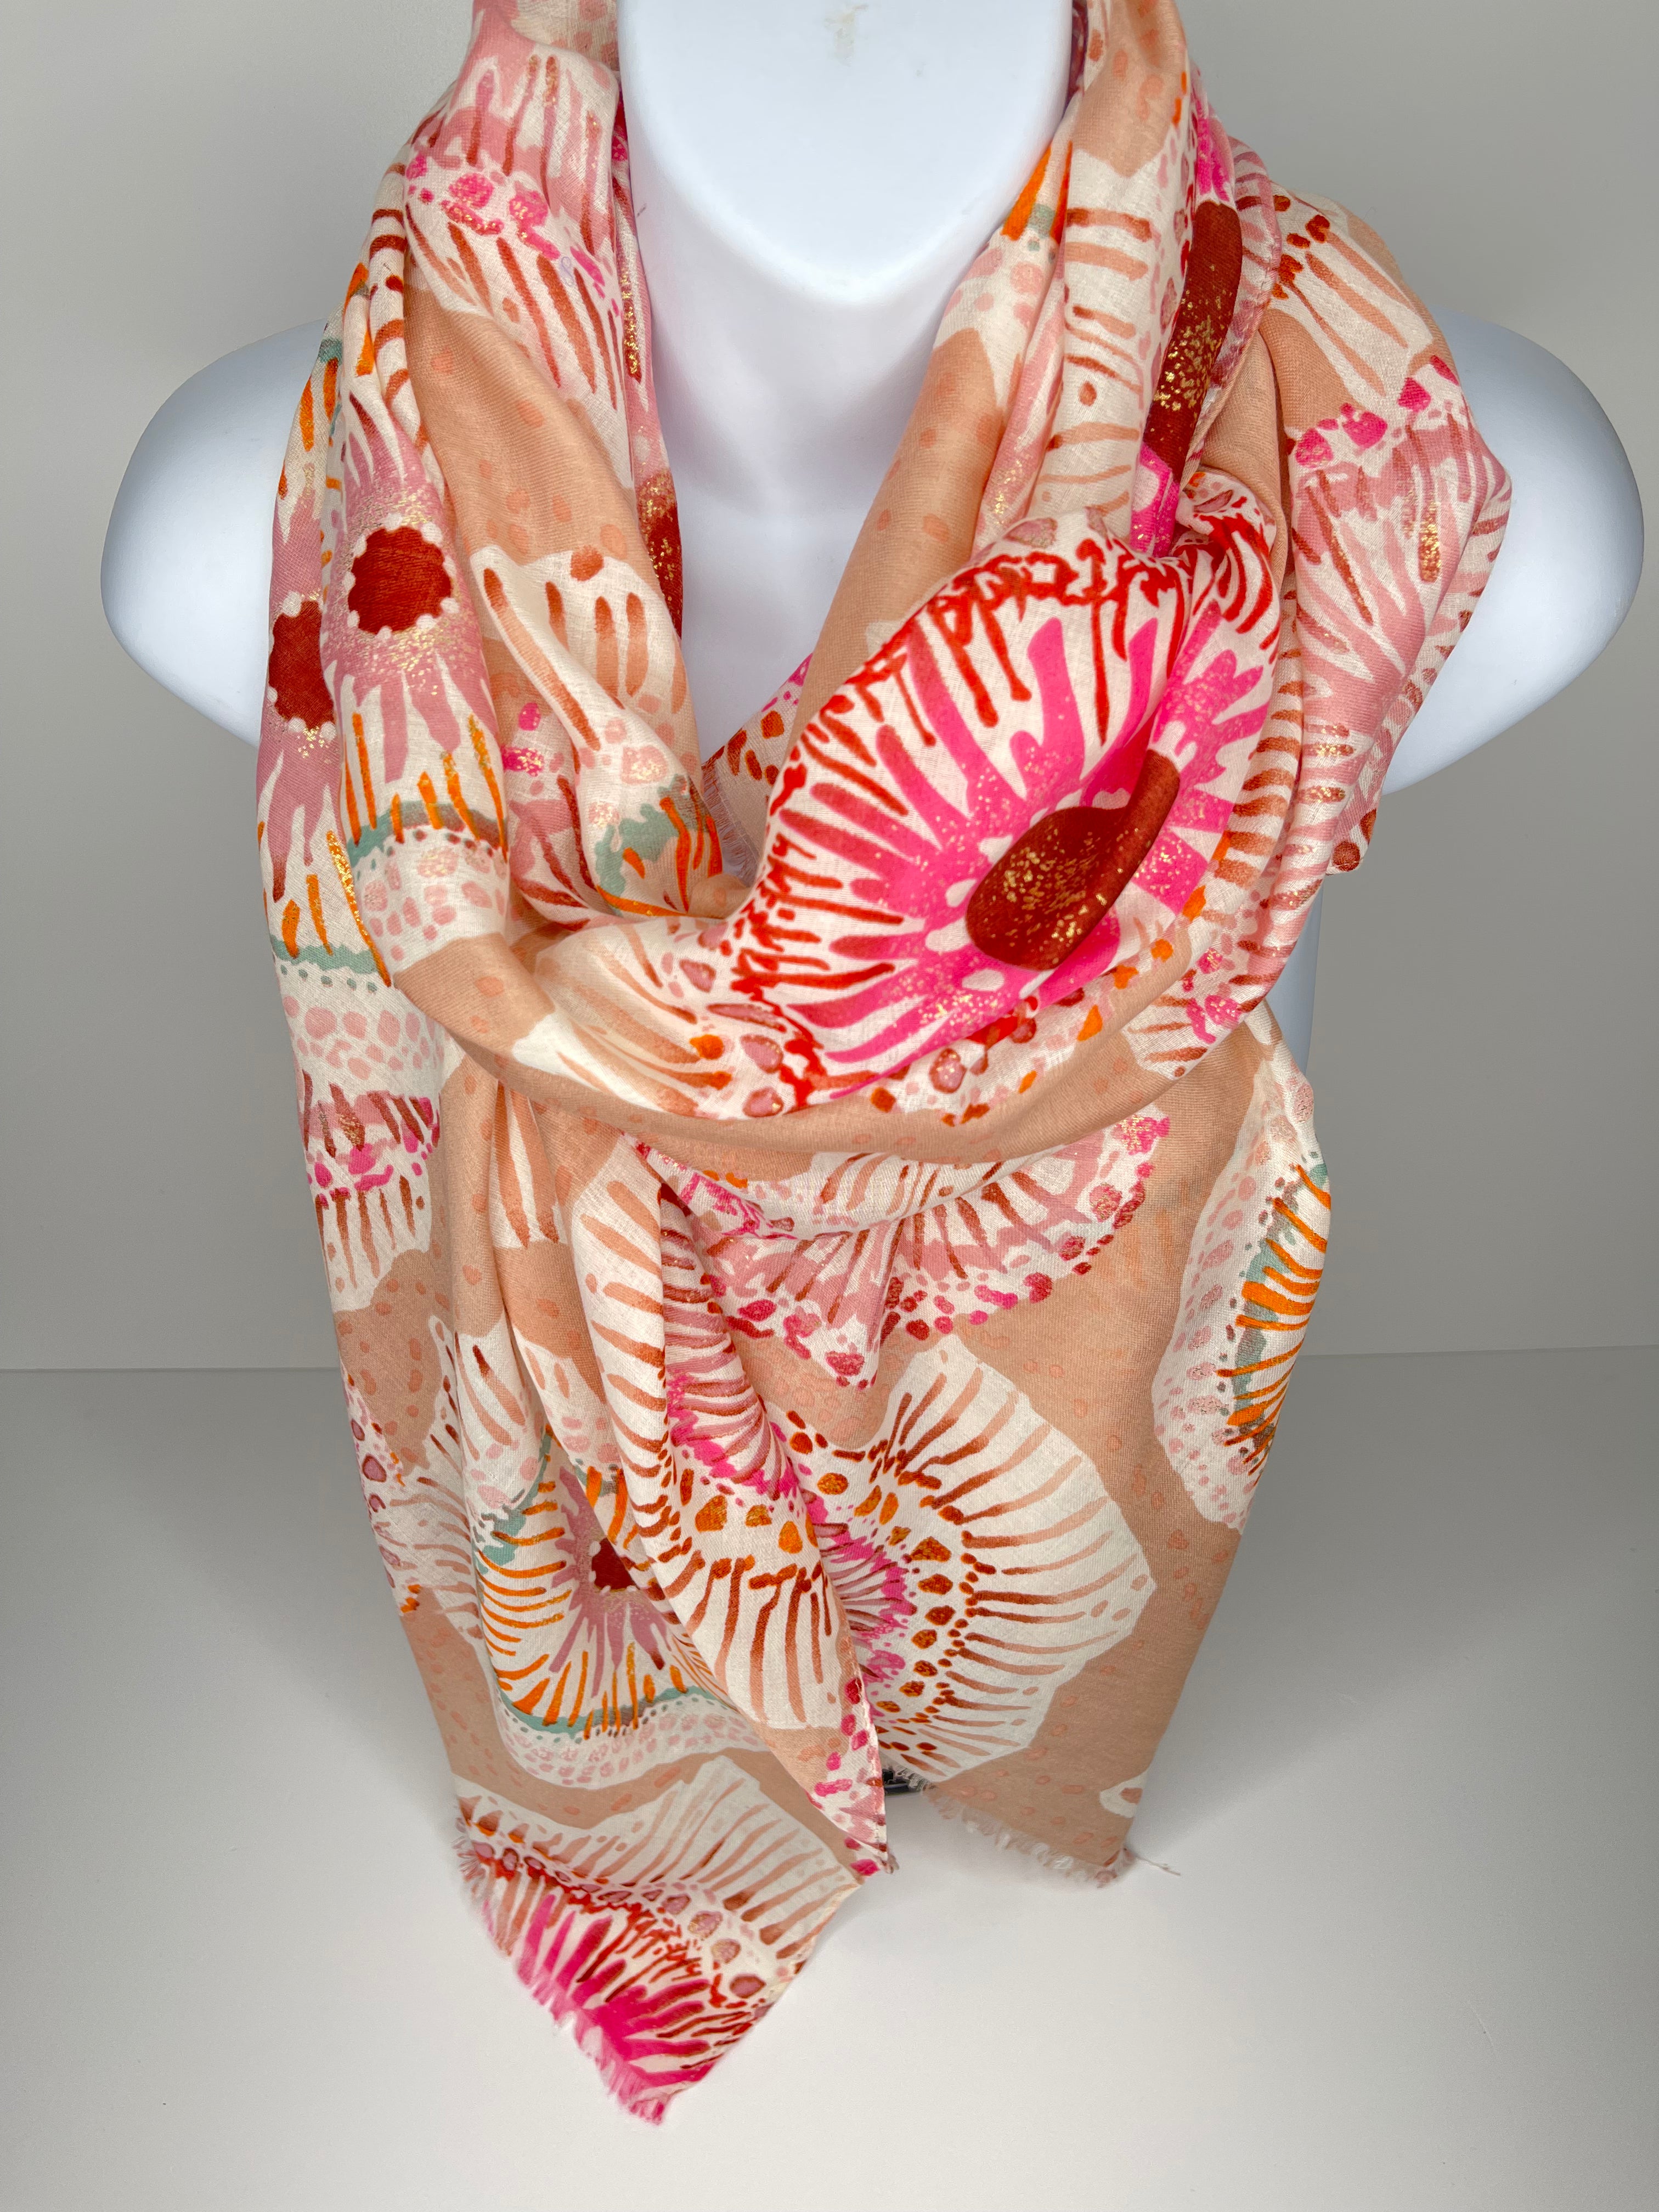 Circular print scarf in shades of orange, beige, pink and white